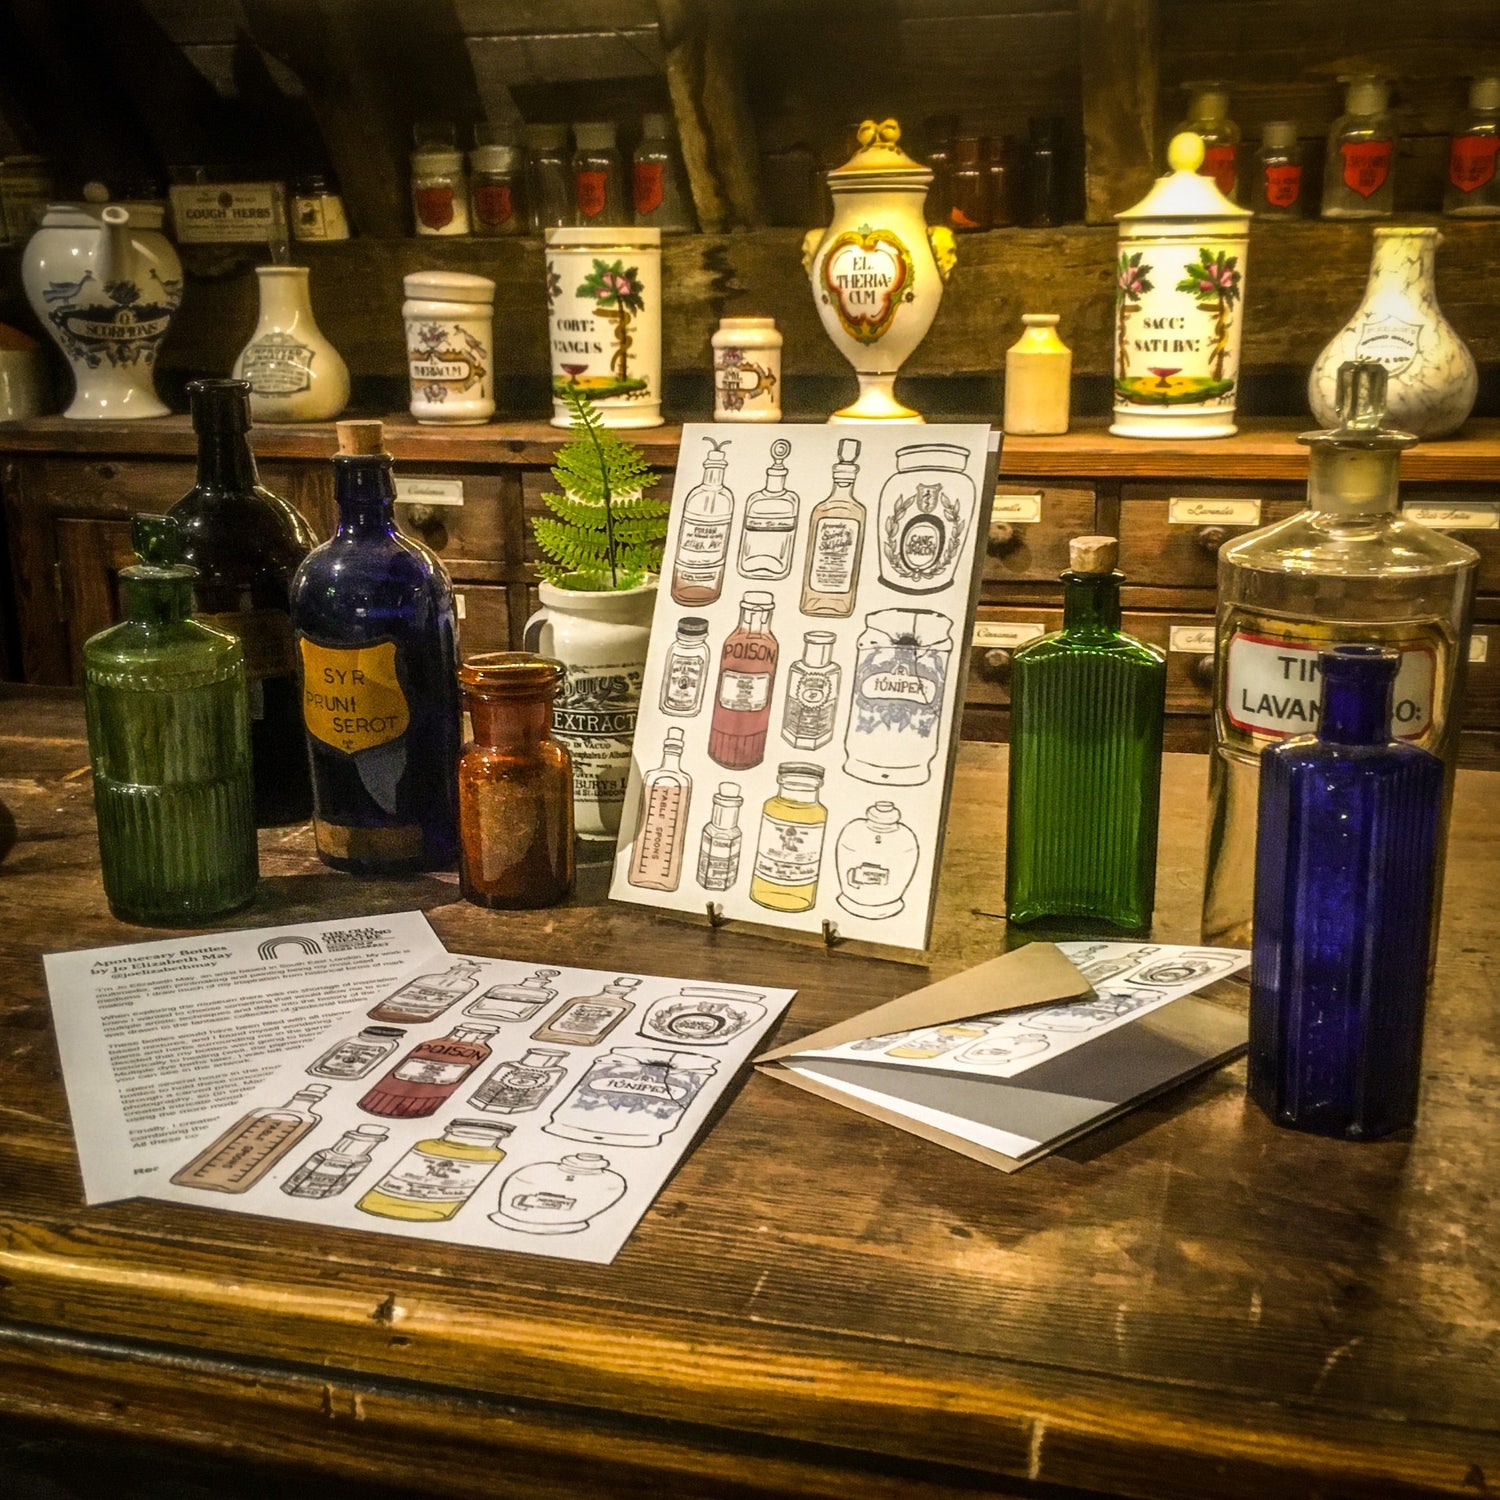 Two prints and a greetings card featuring the apothecary bottles design on the museum's wooden apothecary counter, next to some of the glass apothecary bottles in the museum's collection